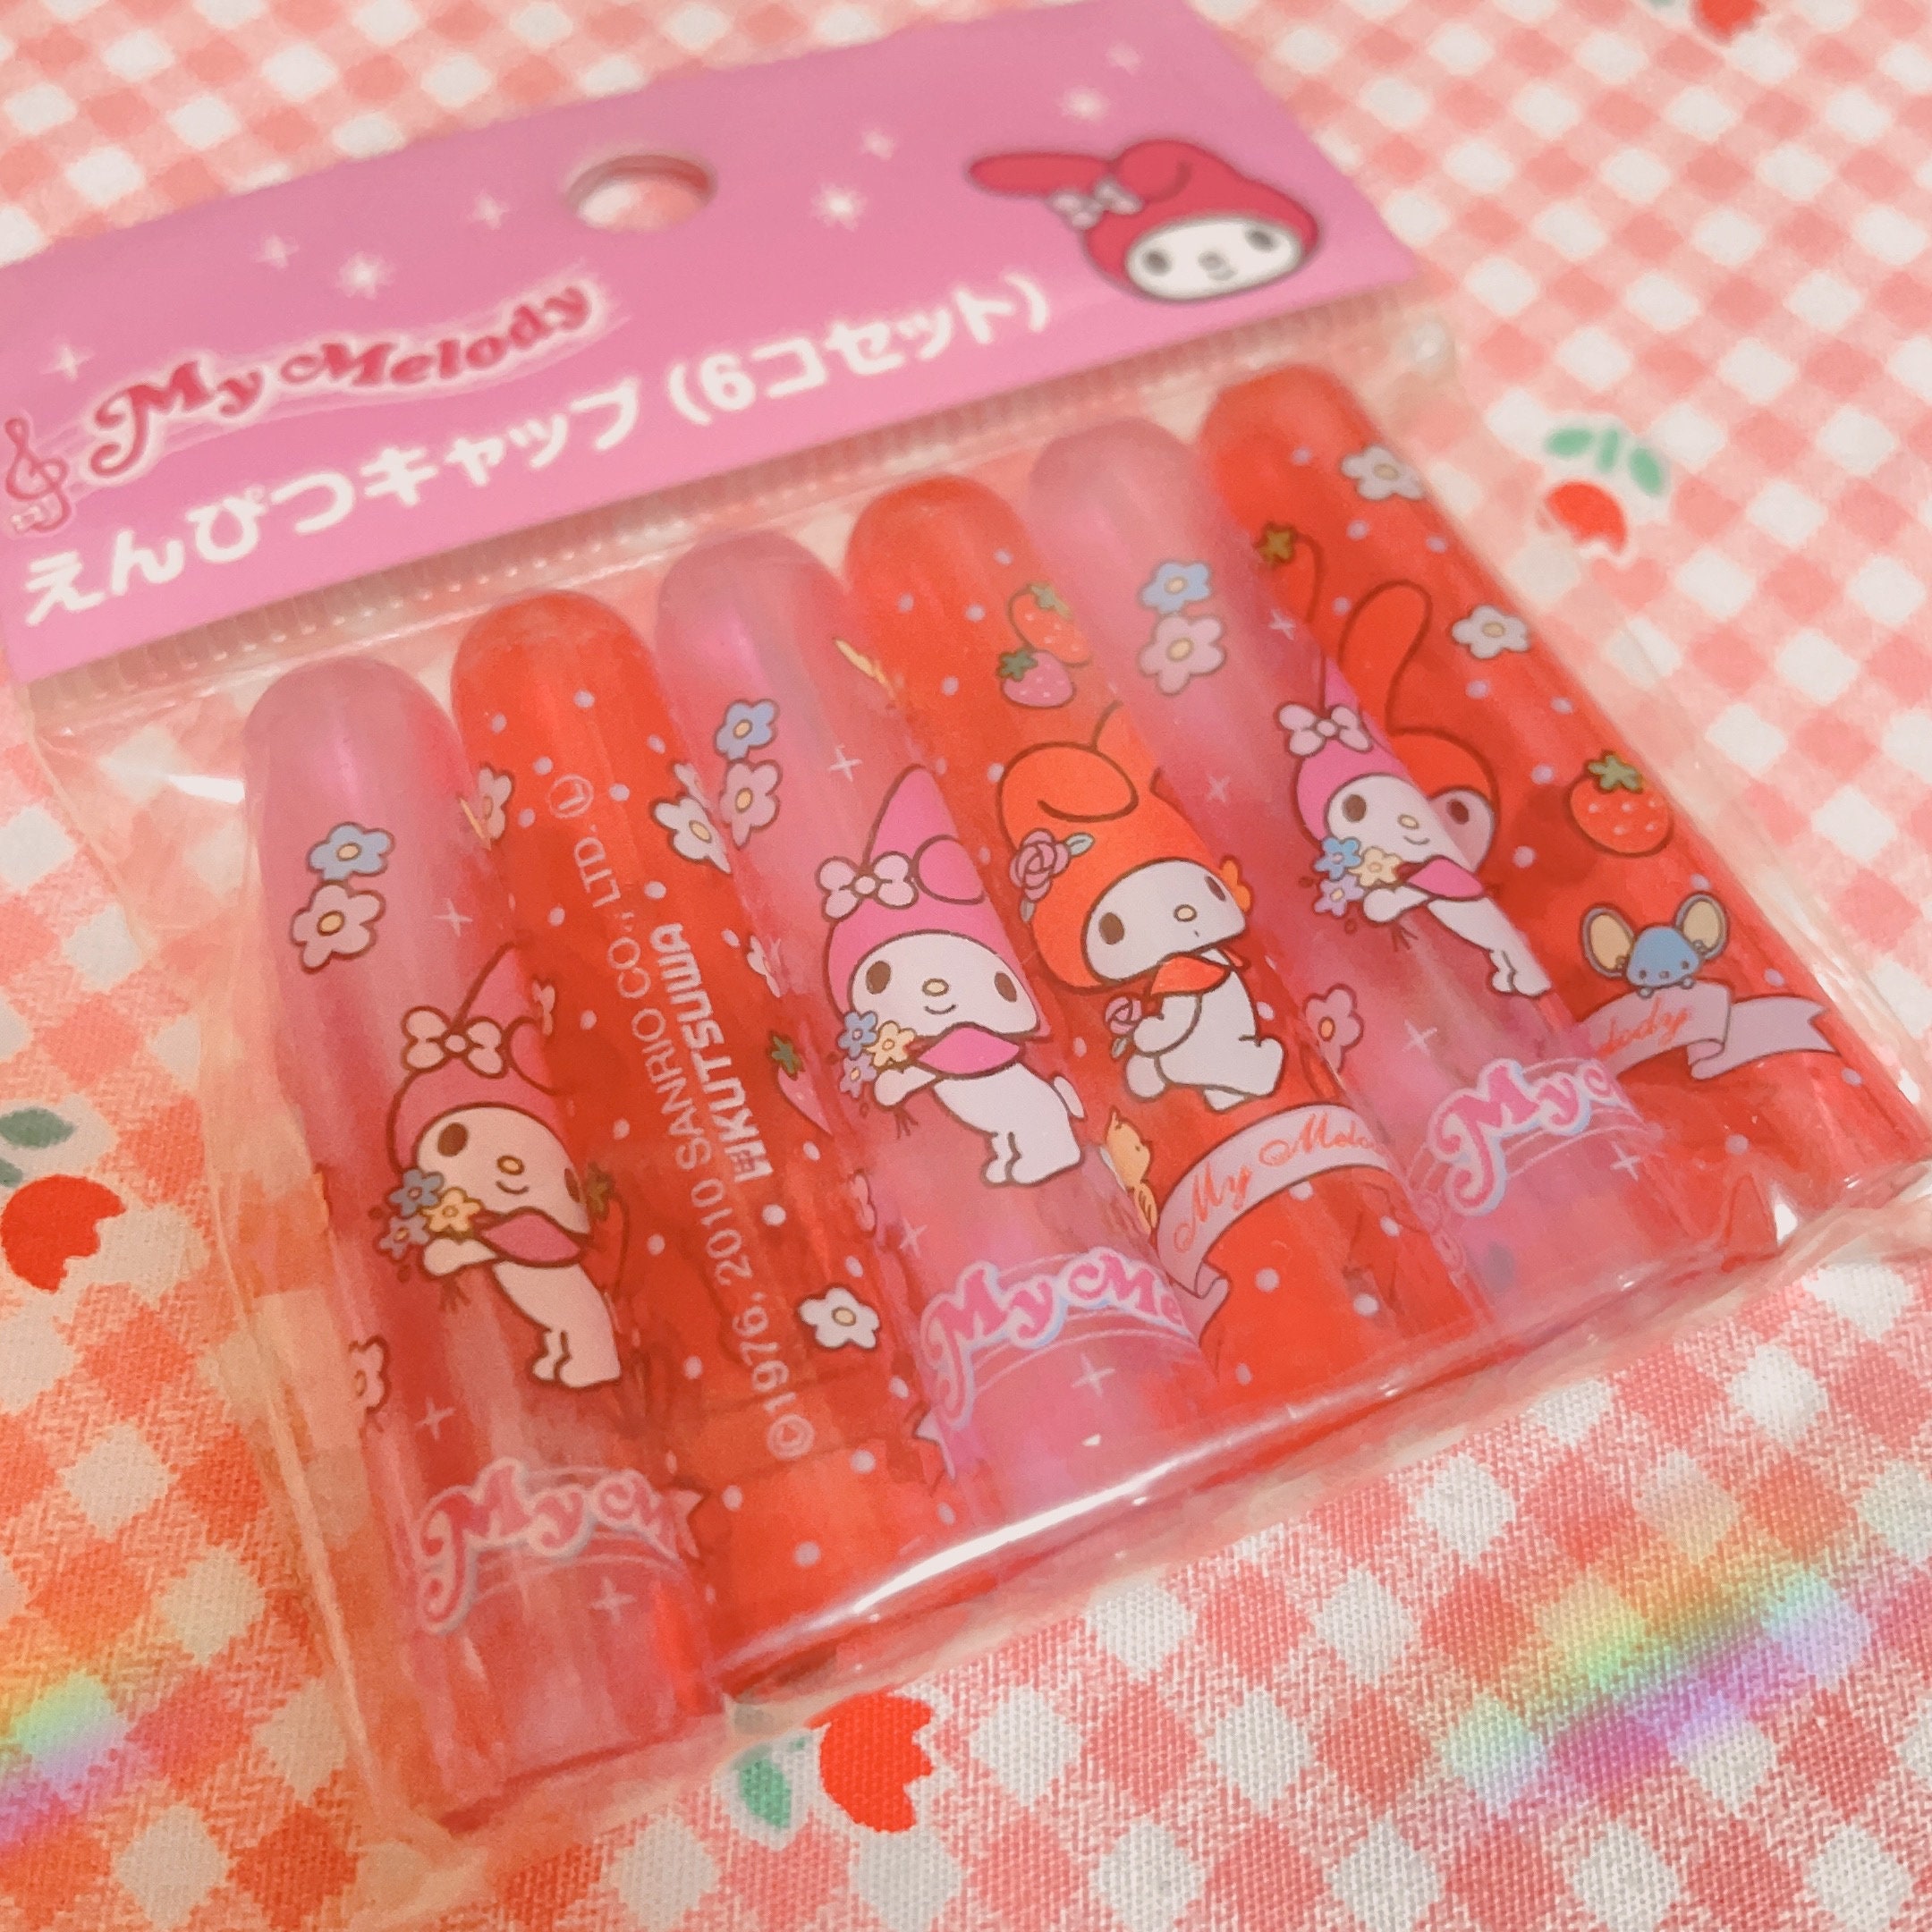 11-in-1] Sanrio My Melody & Kuromi Pencil Topper Cap Stationery